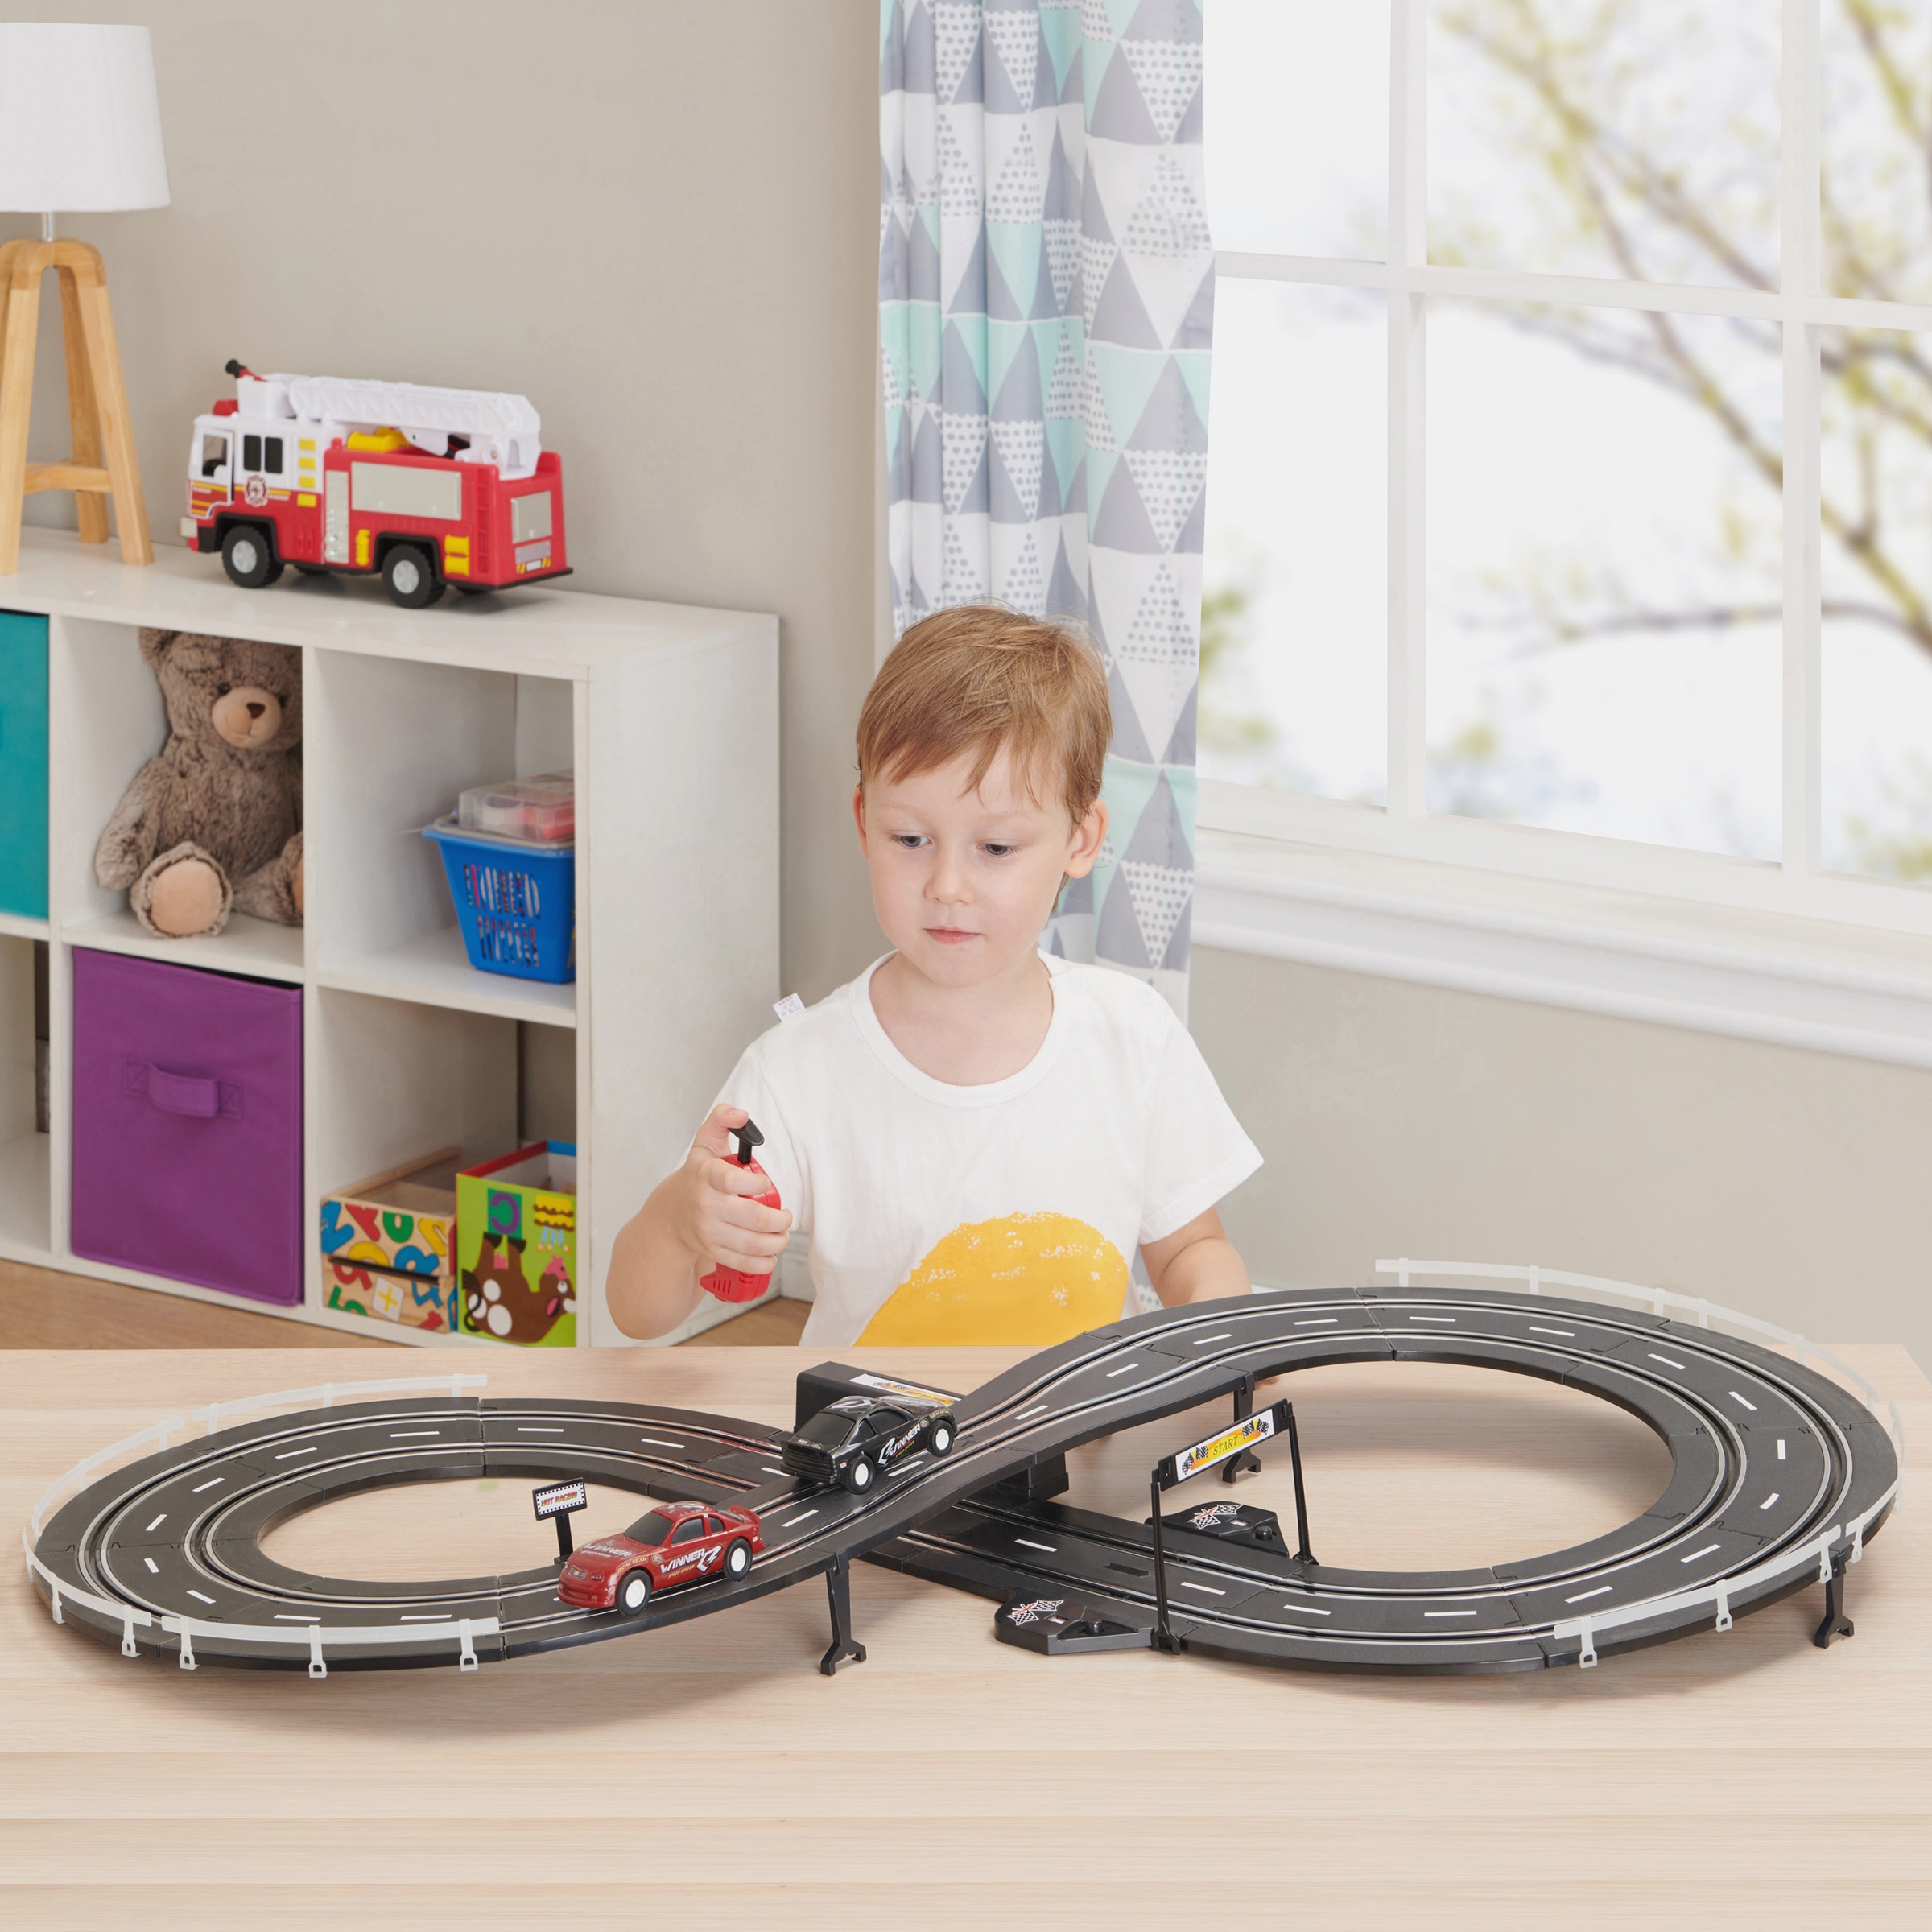 Kid Connection 37-Piece Road Racing Track Play Set, Battery Operated - image 4 of 4